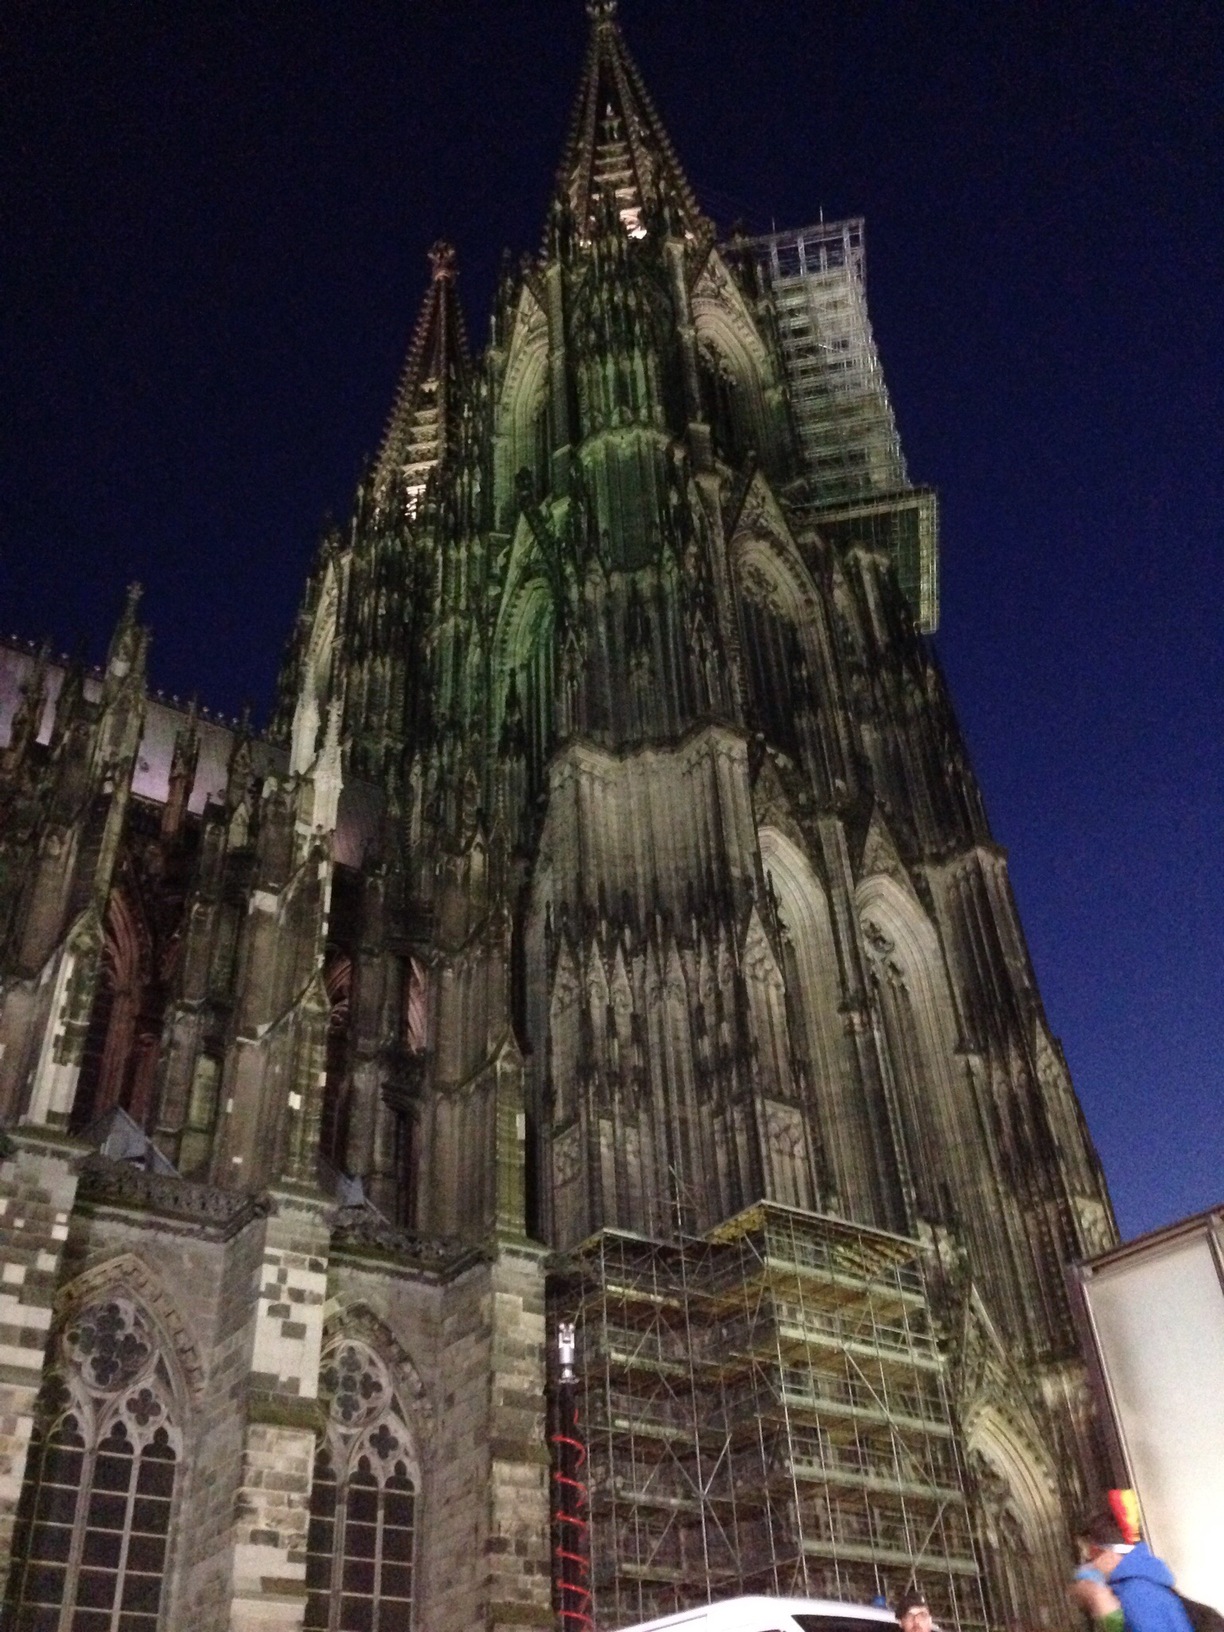 Cologne Cathedral, Cologne, Germany - The imposing beauty of the...